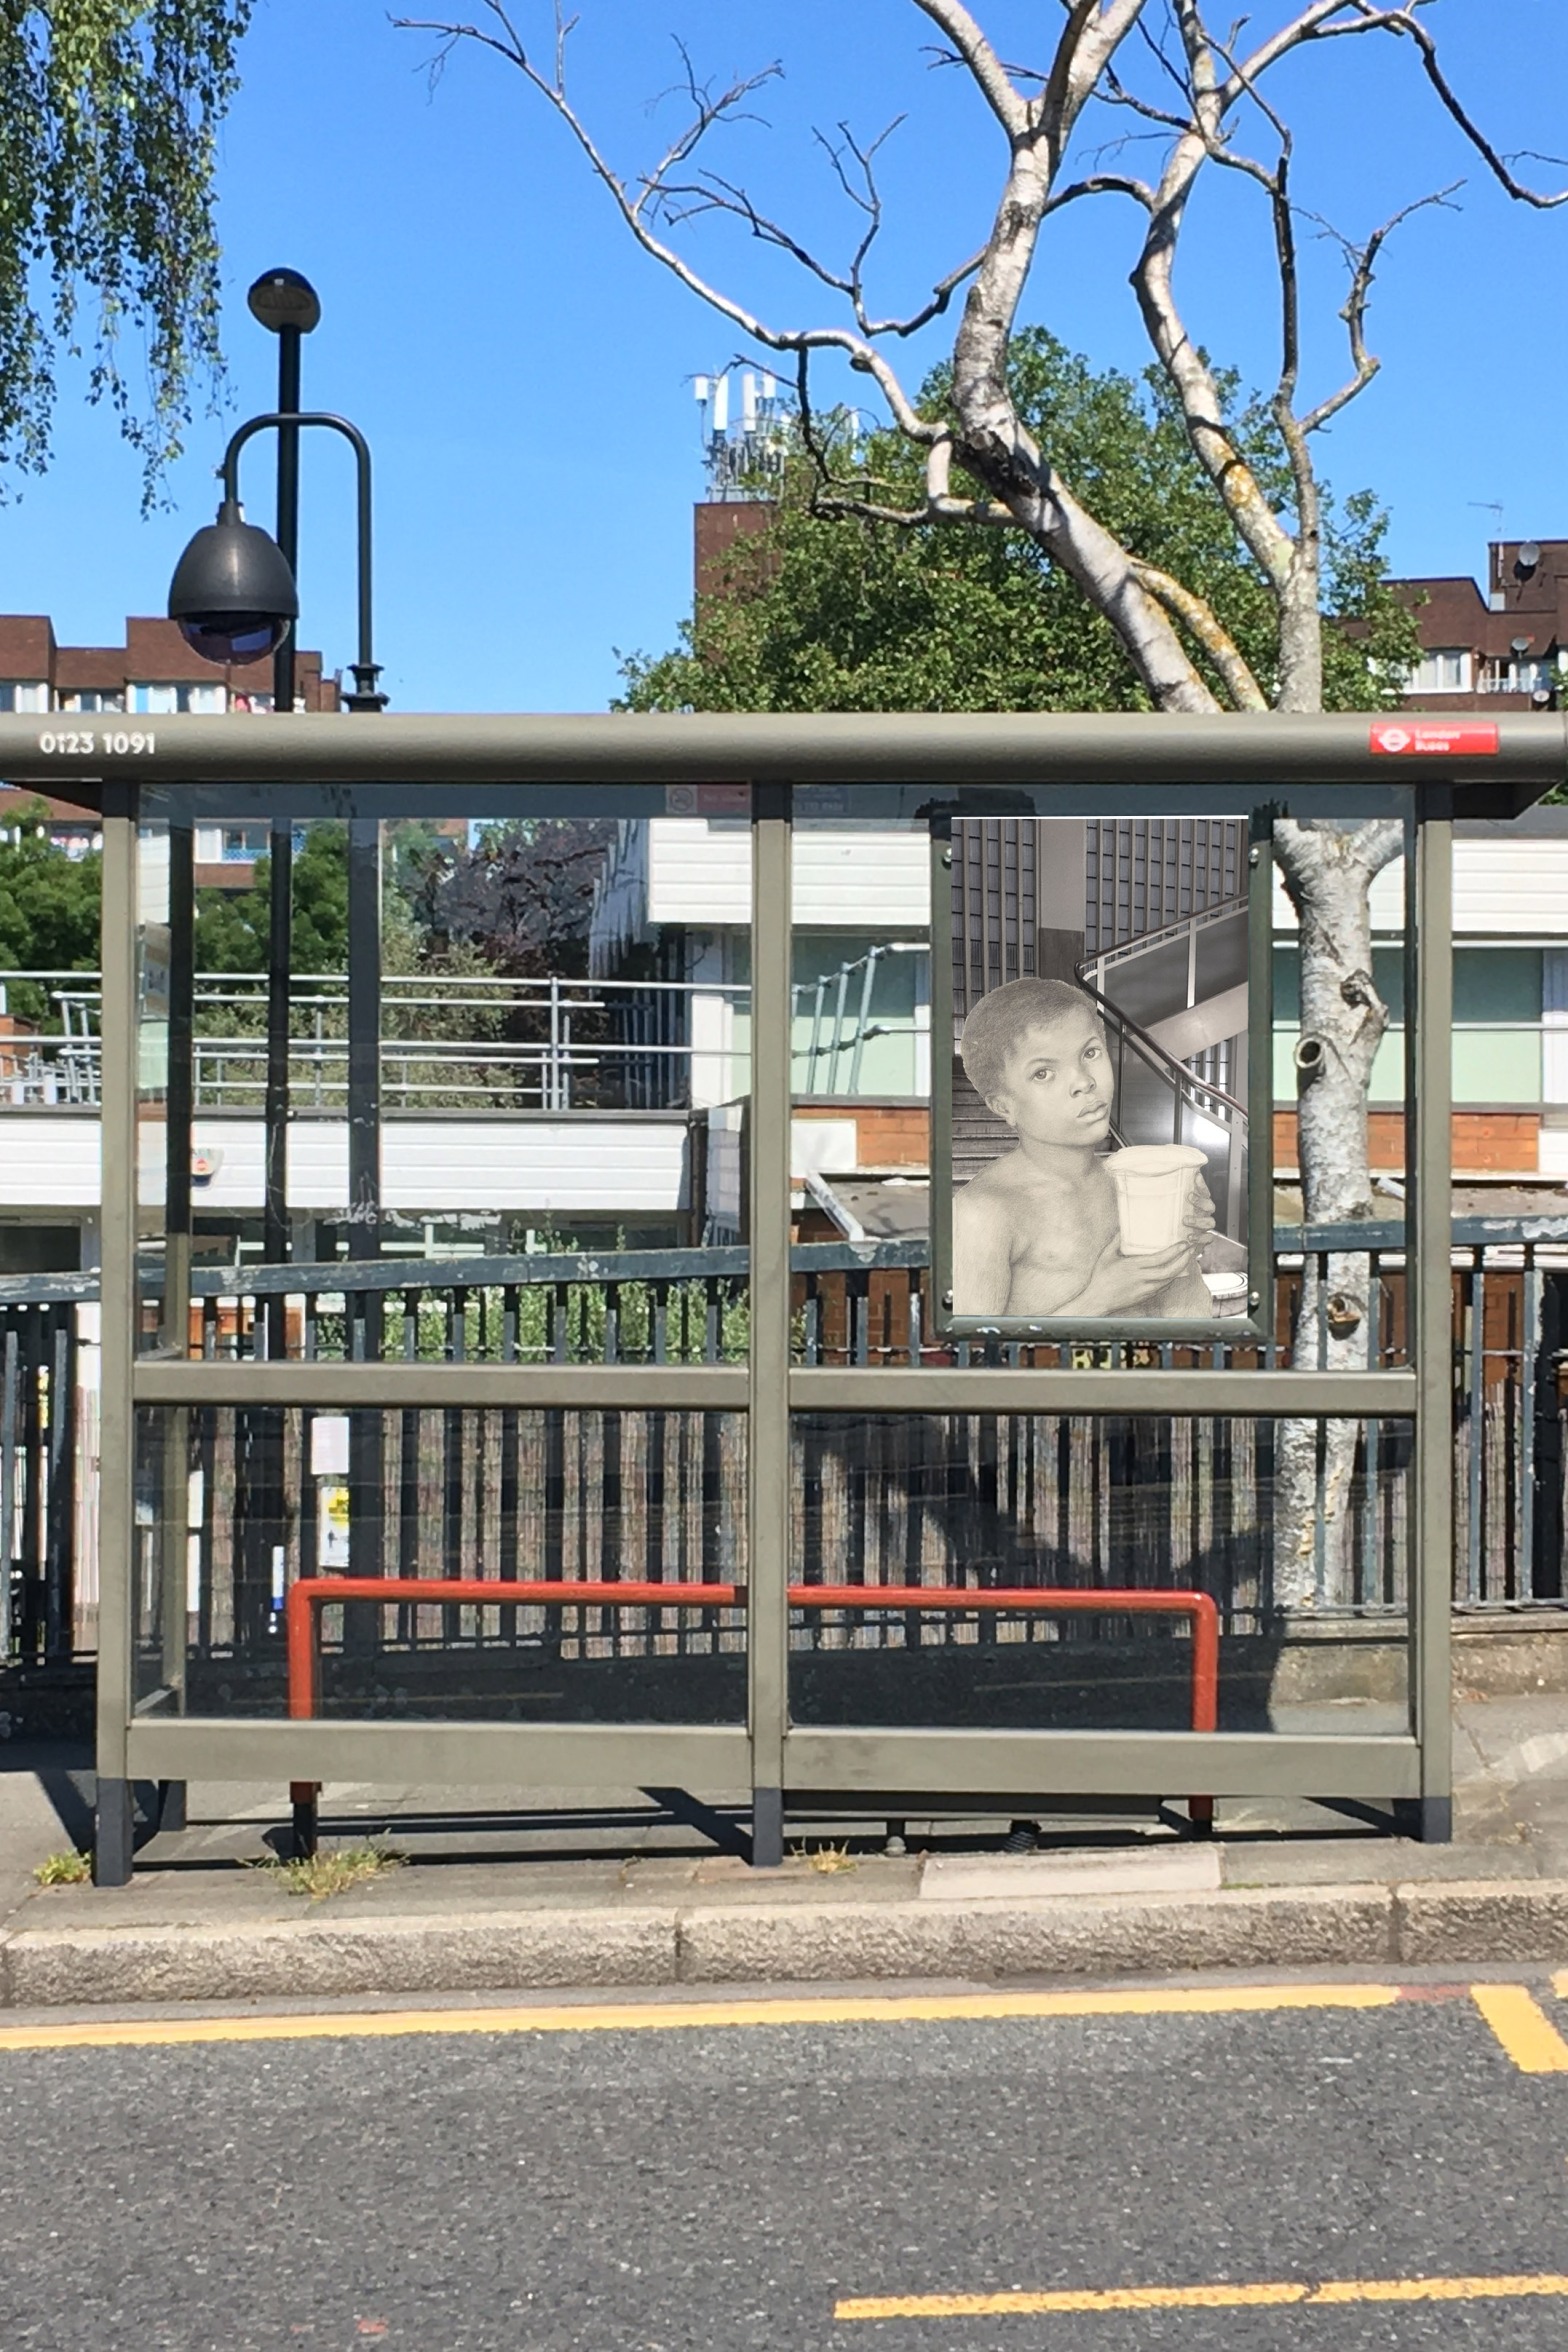 Dante Gabriel Rossetti's "The Beloved – Study of a Black Boy" (1865–66) in front of the stairway in the Piccadilly Waterstones (b&w) on the side of a bus stop on Oxestalls Road next to Deptford Park School, Deptford, London